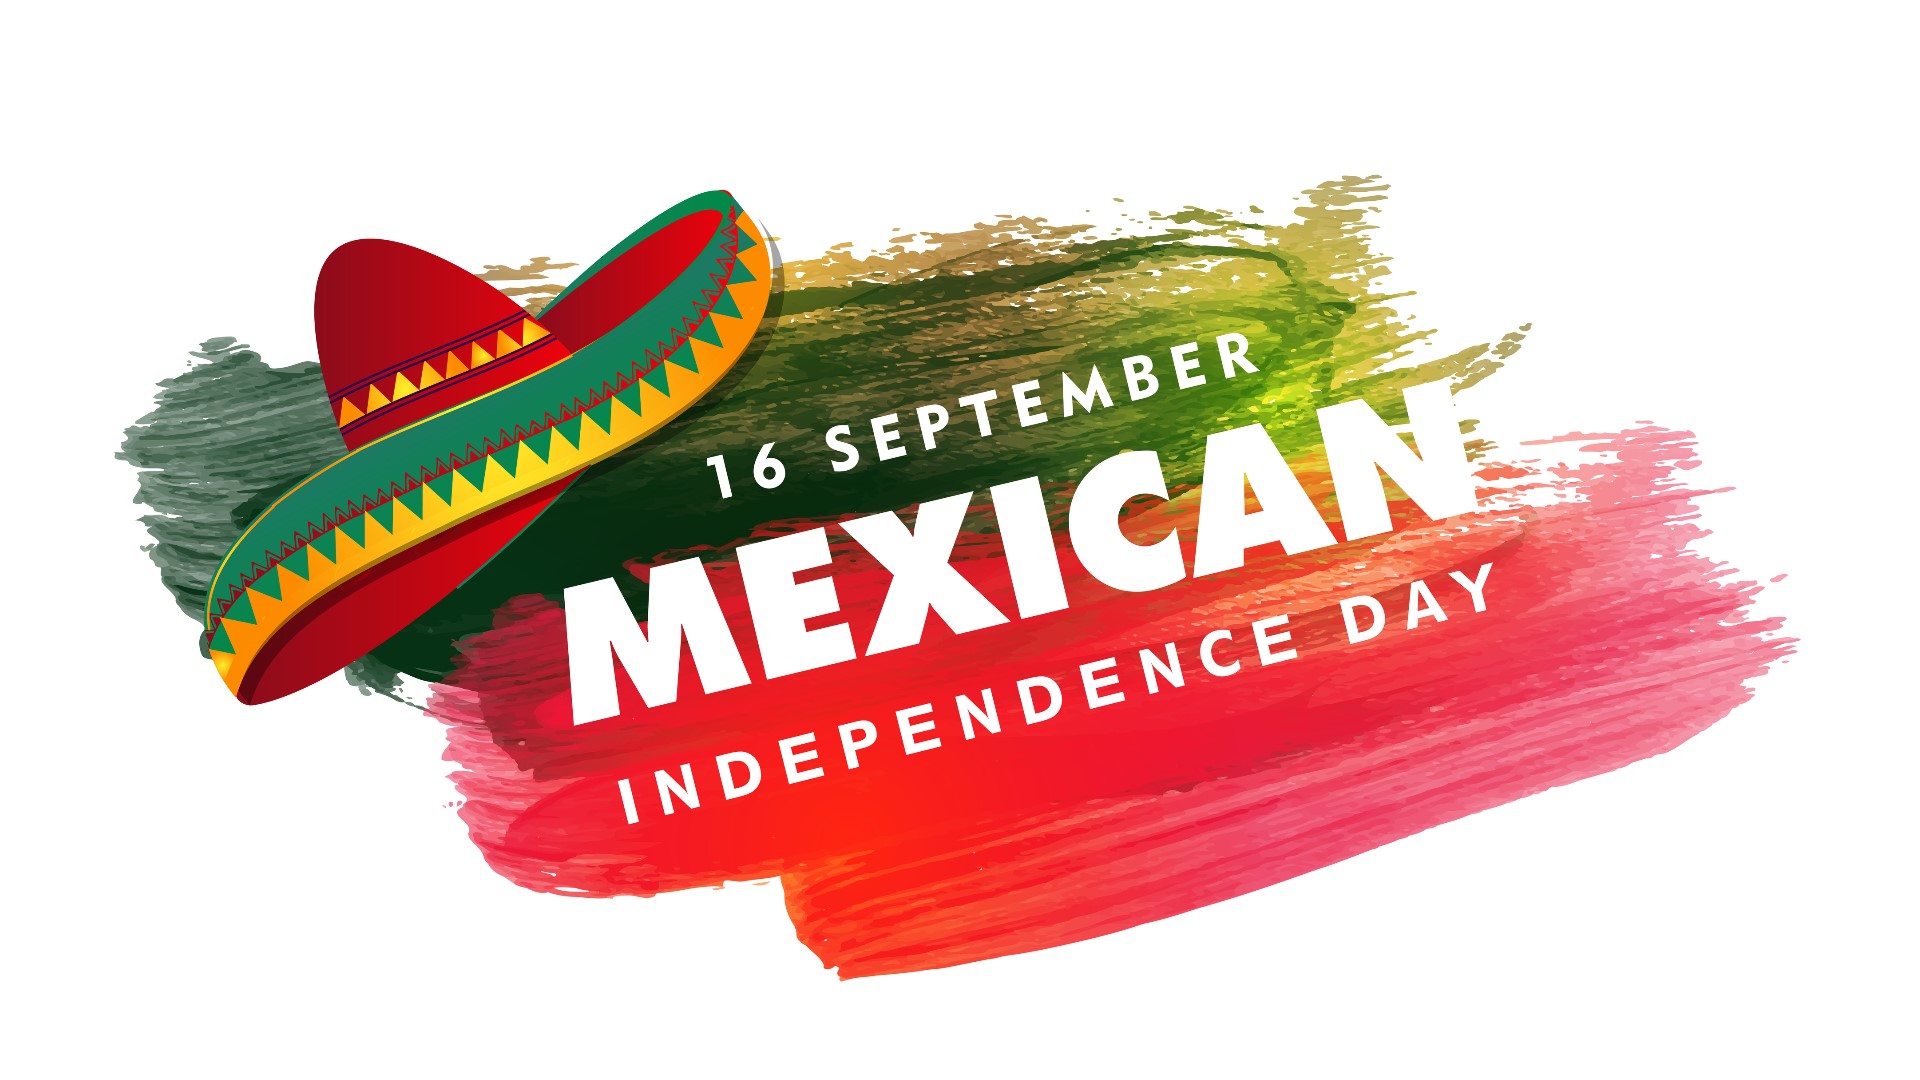 9NEWS Race and Equity expert Dr. Rosemarie Allen explains the history and significance of Mexican Independence Day.